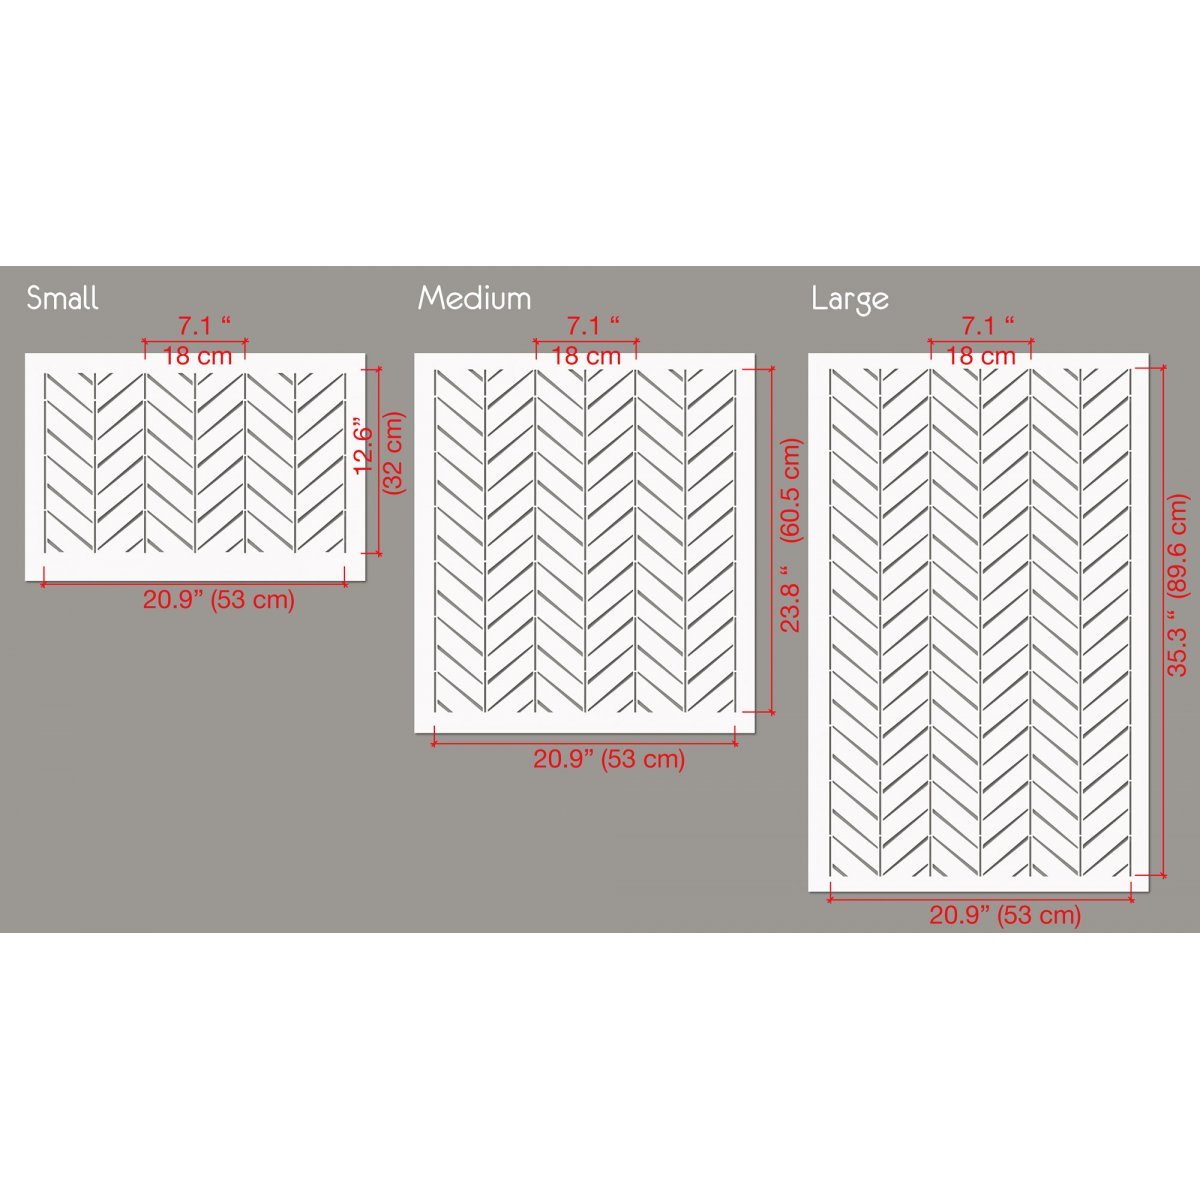 HERRINGBONE Vintage / Reusable Allover Large Wall Stencils for Painting